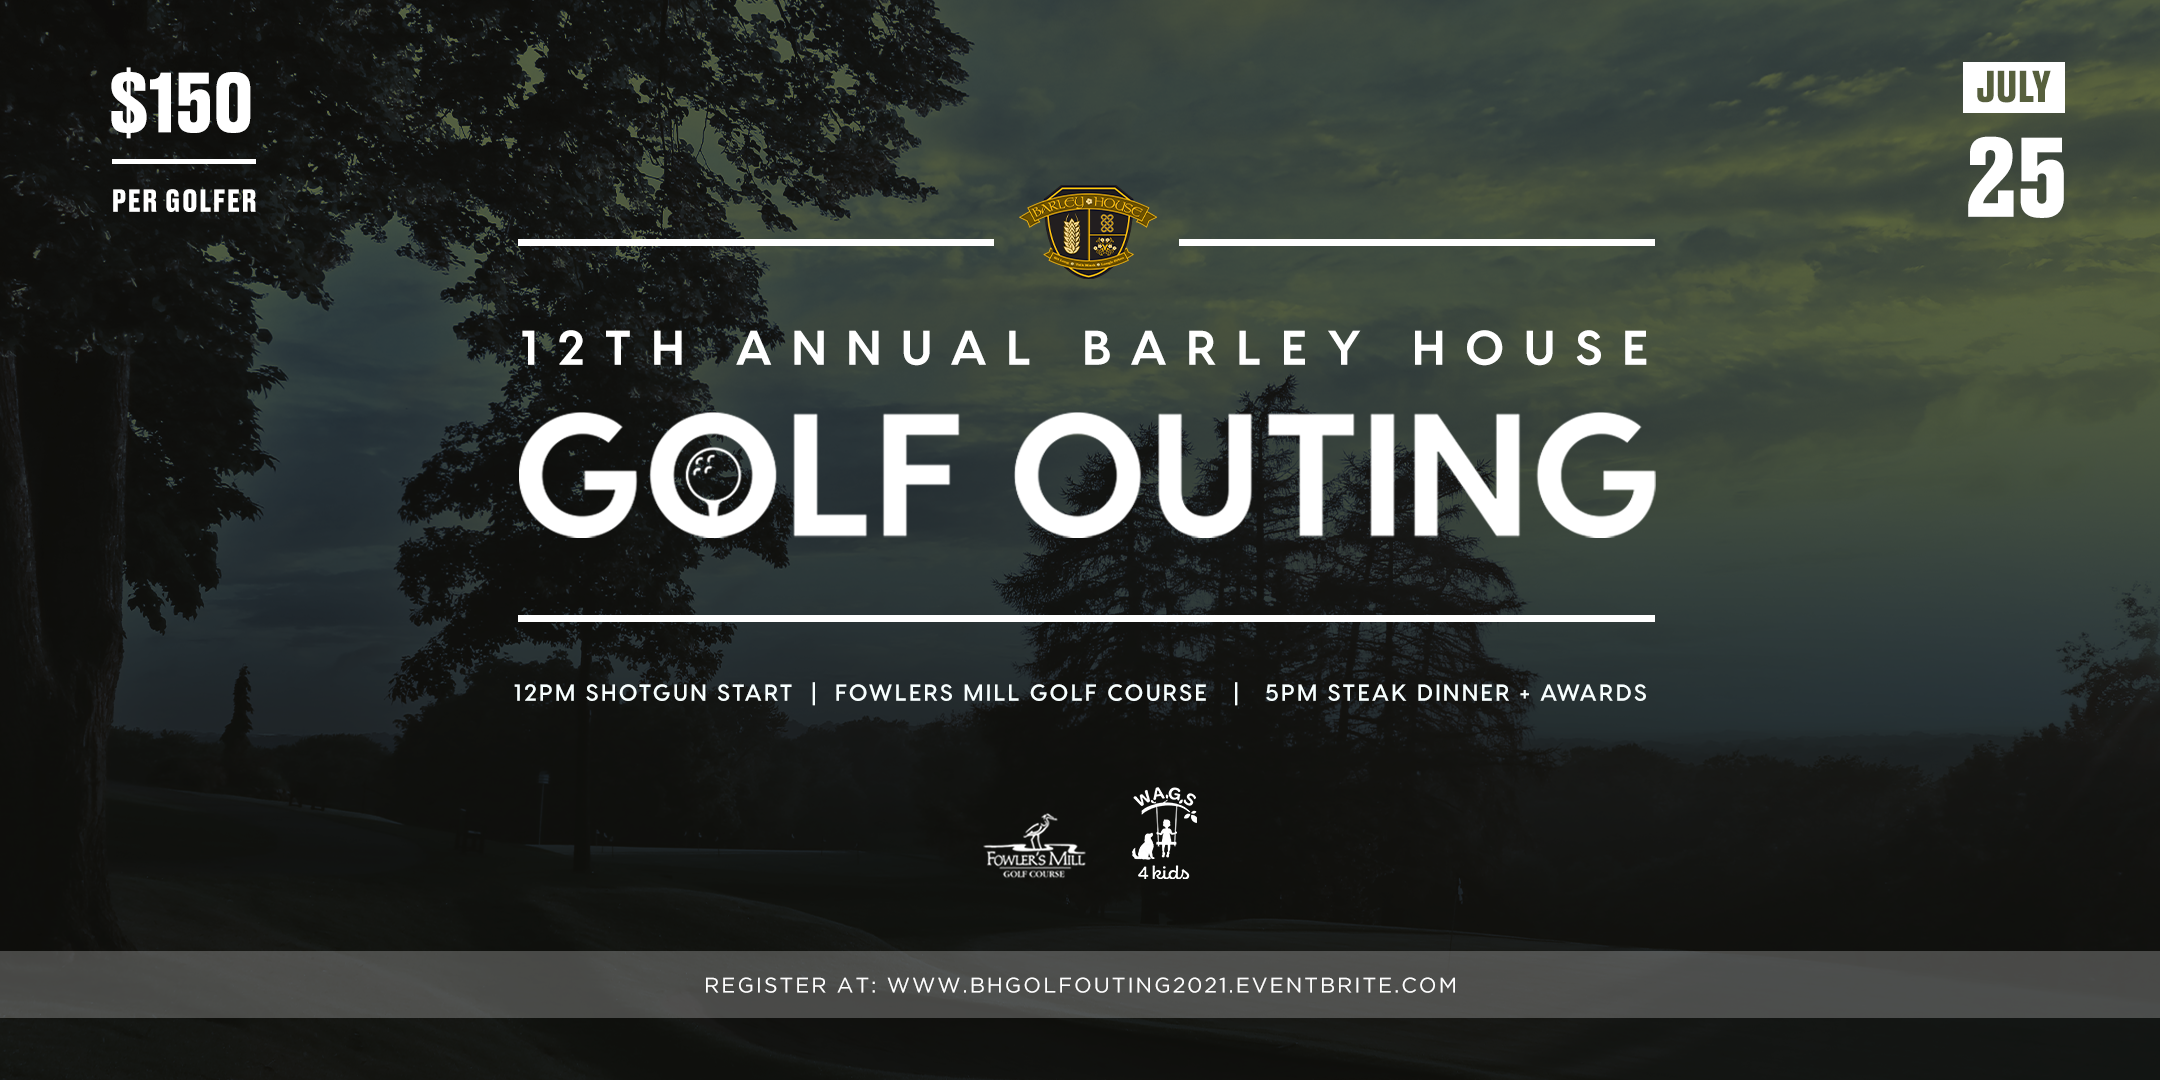 Barley House Golf Outing-12th Annual